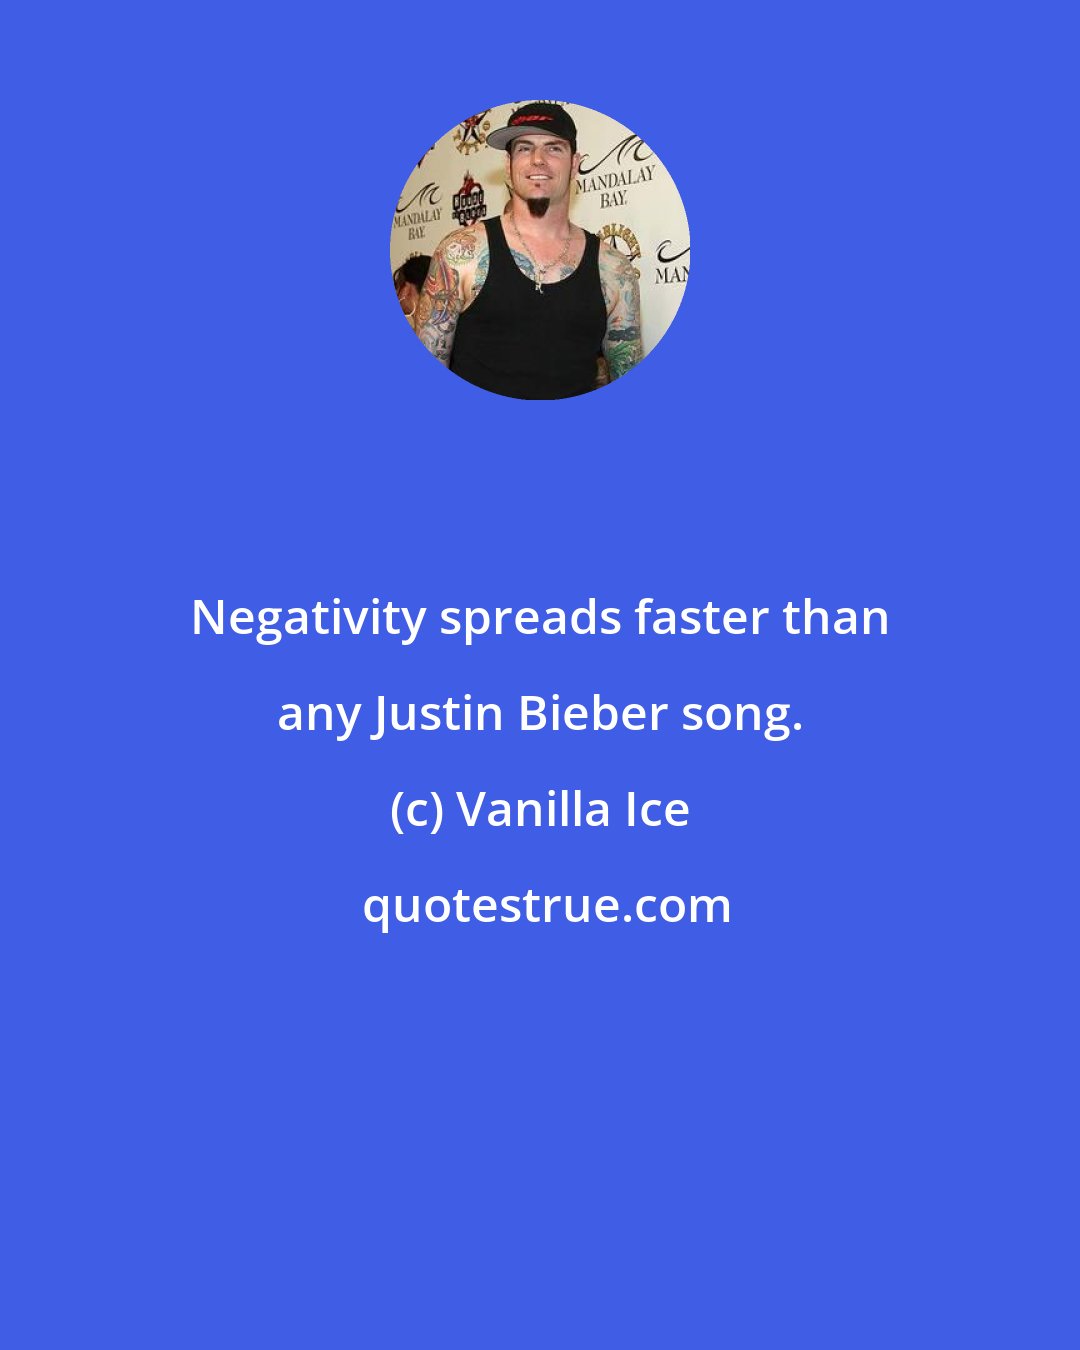 Vanilla Ice: Negativity spreads faster than any Justin Bieber song.